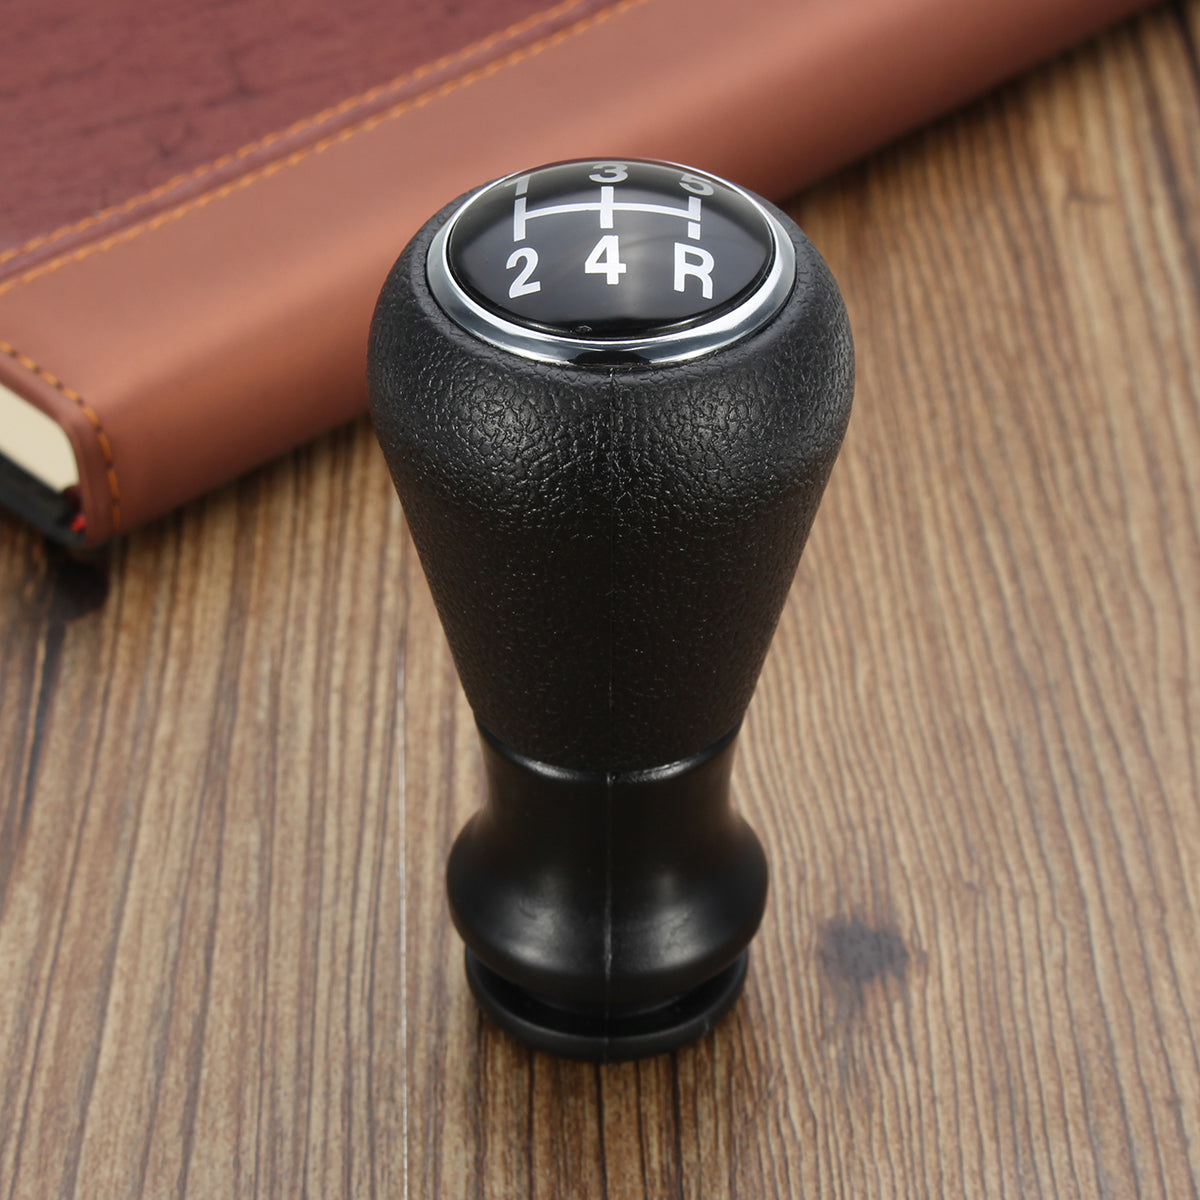 Rosy Brown 5 Speed Manual Car Gear Shift Knob For Peugeot 106 206 306 406 806 107 207 307